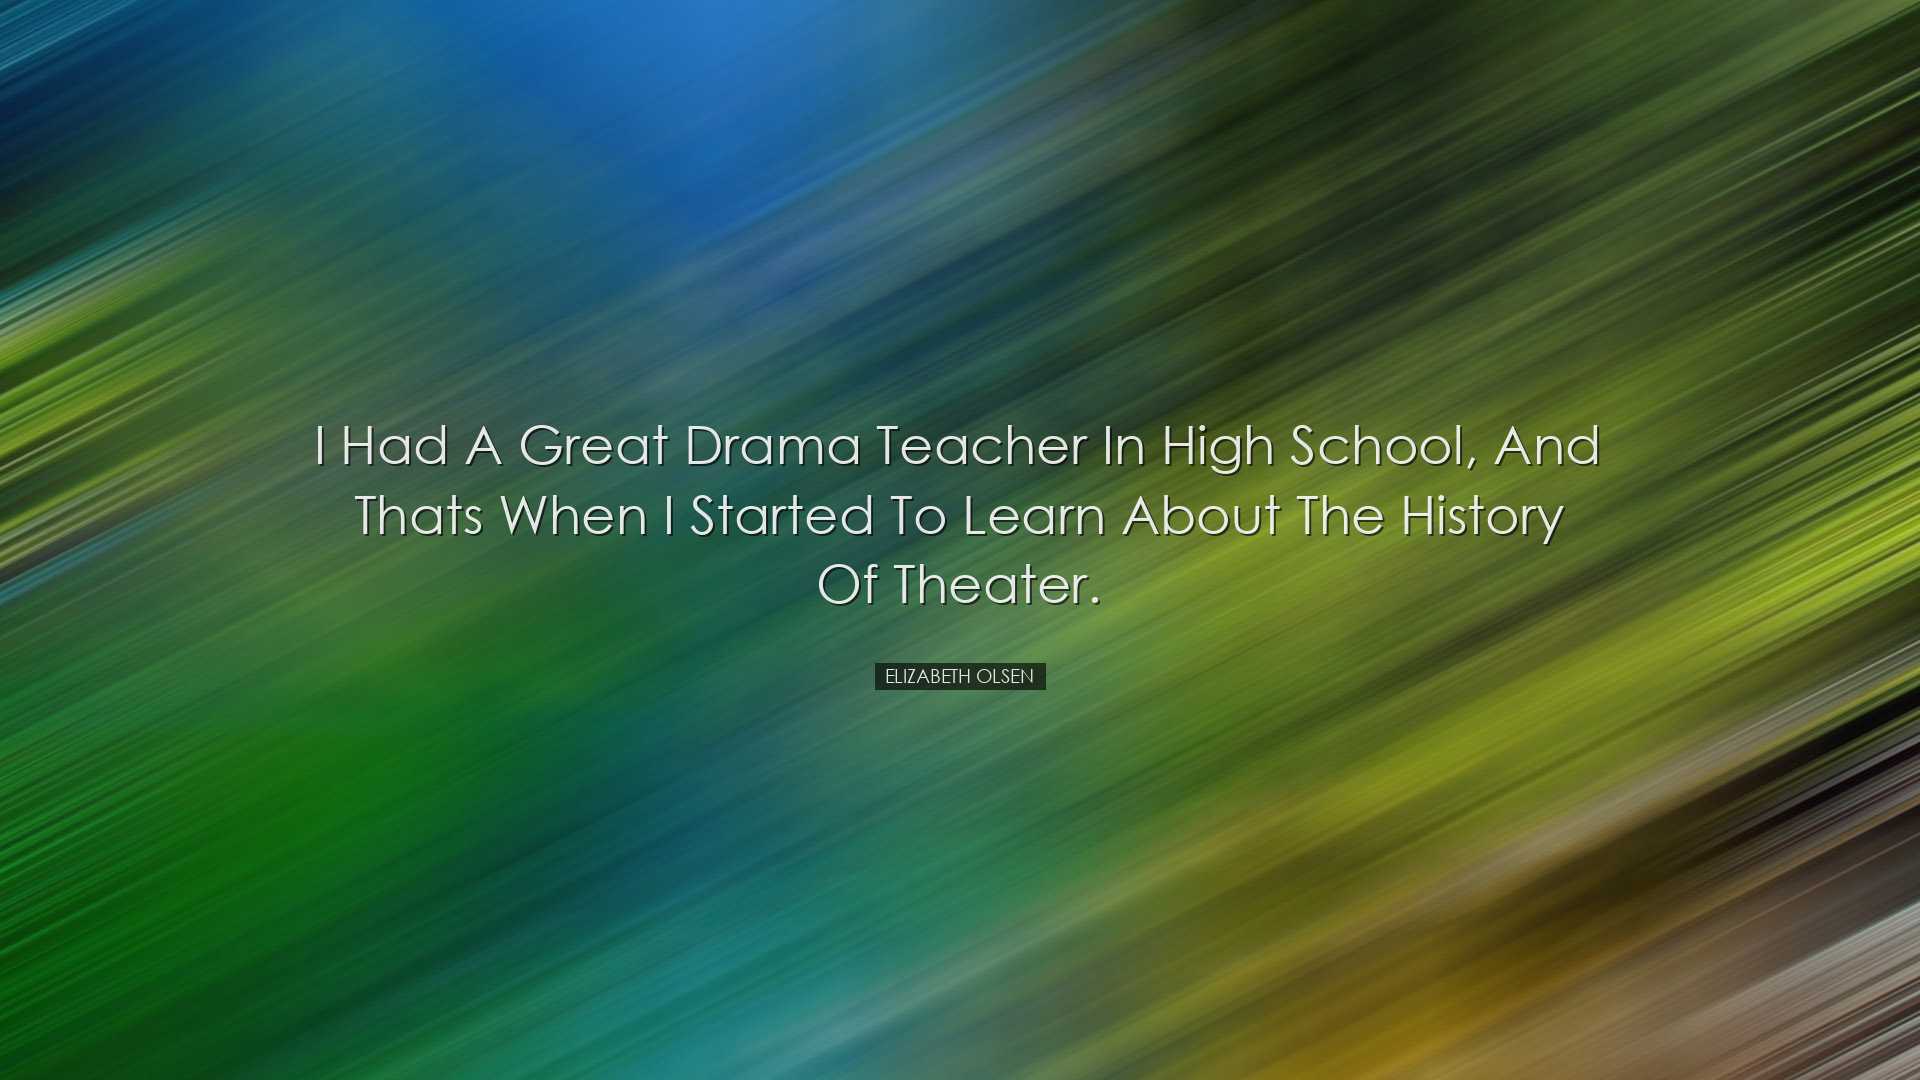 I had a great drama teacher in high school, and thats when I start